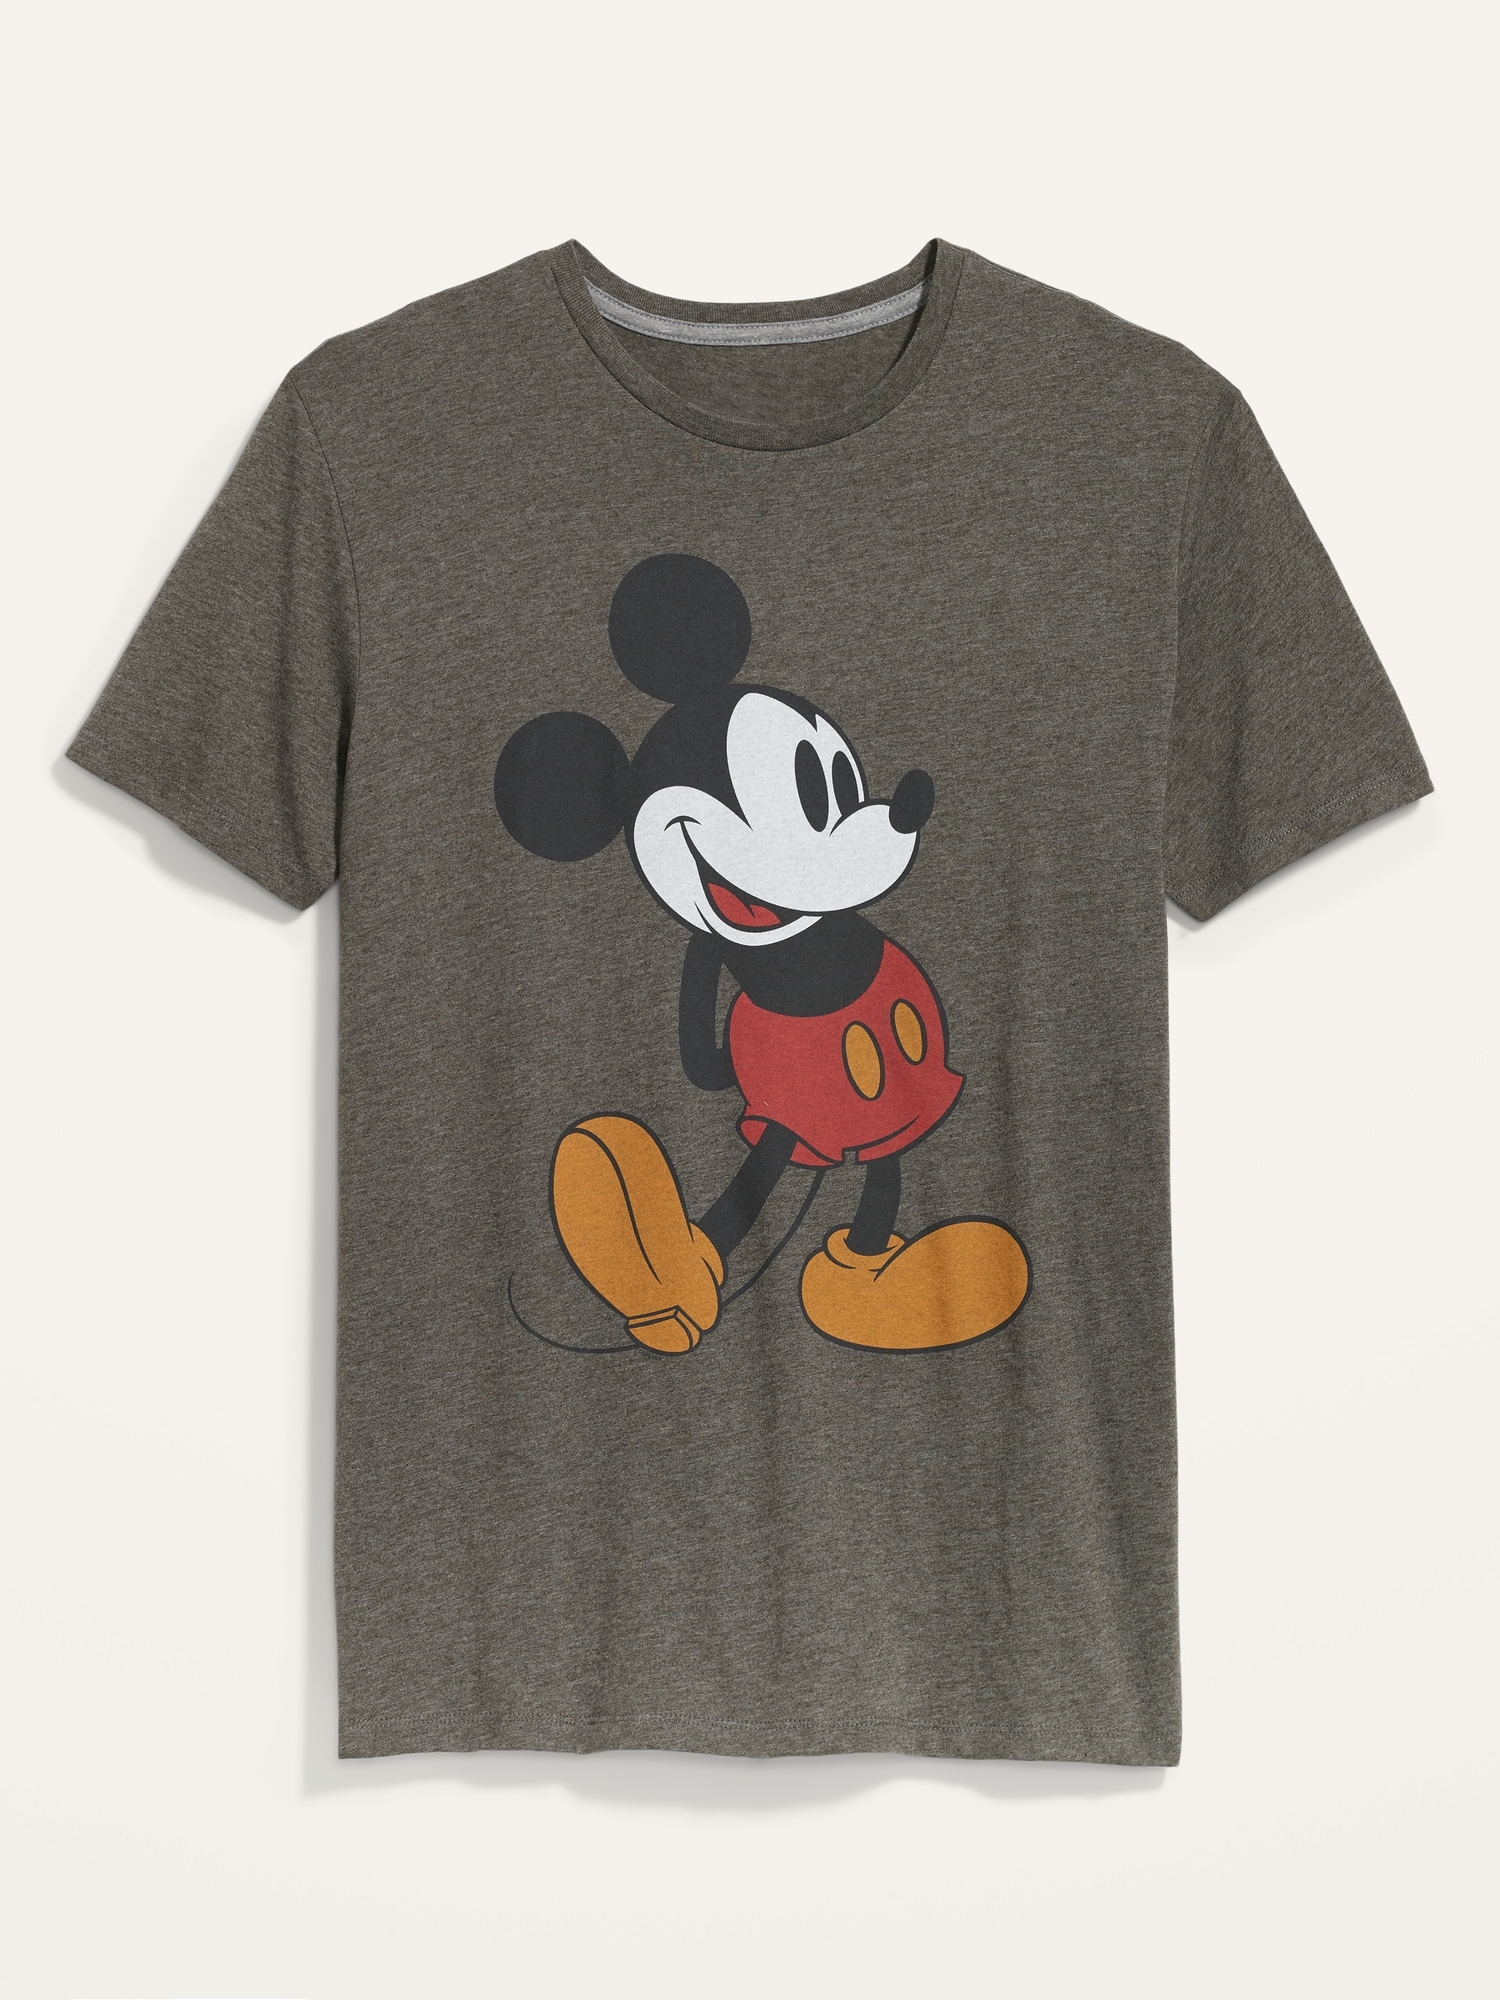 Disneyⓒ Mickey Mouse Gender-Neutral T-Shirt for Adults